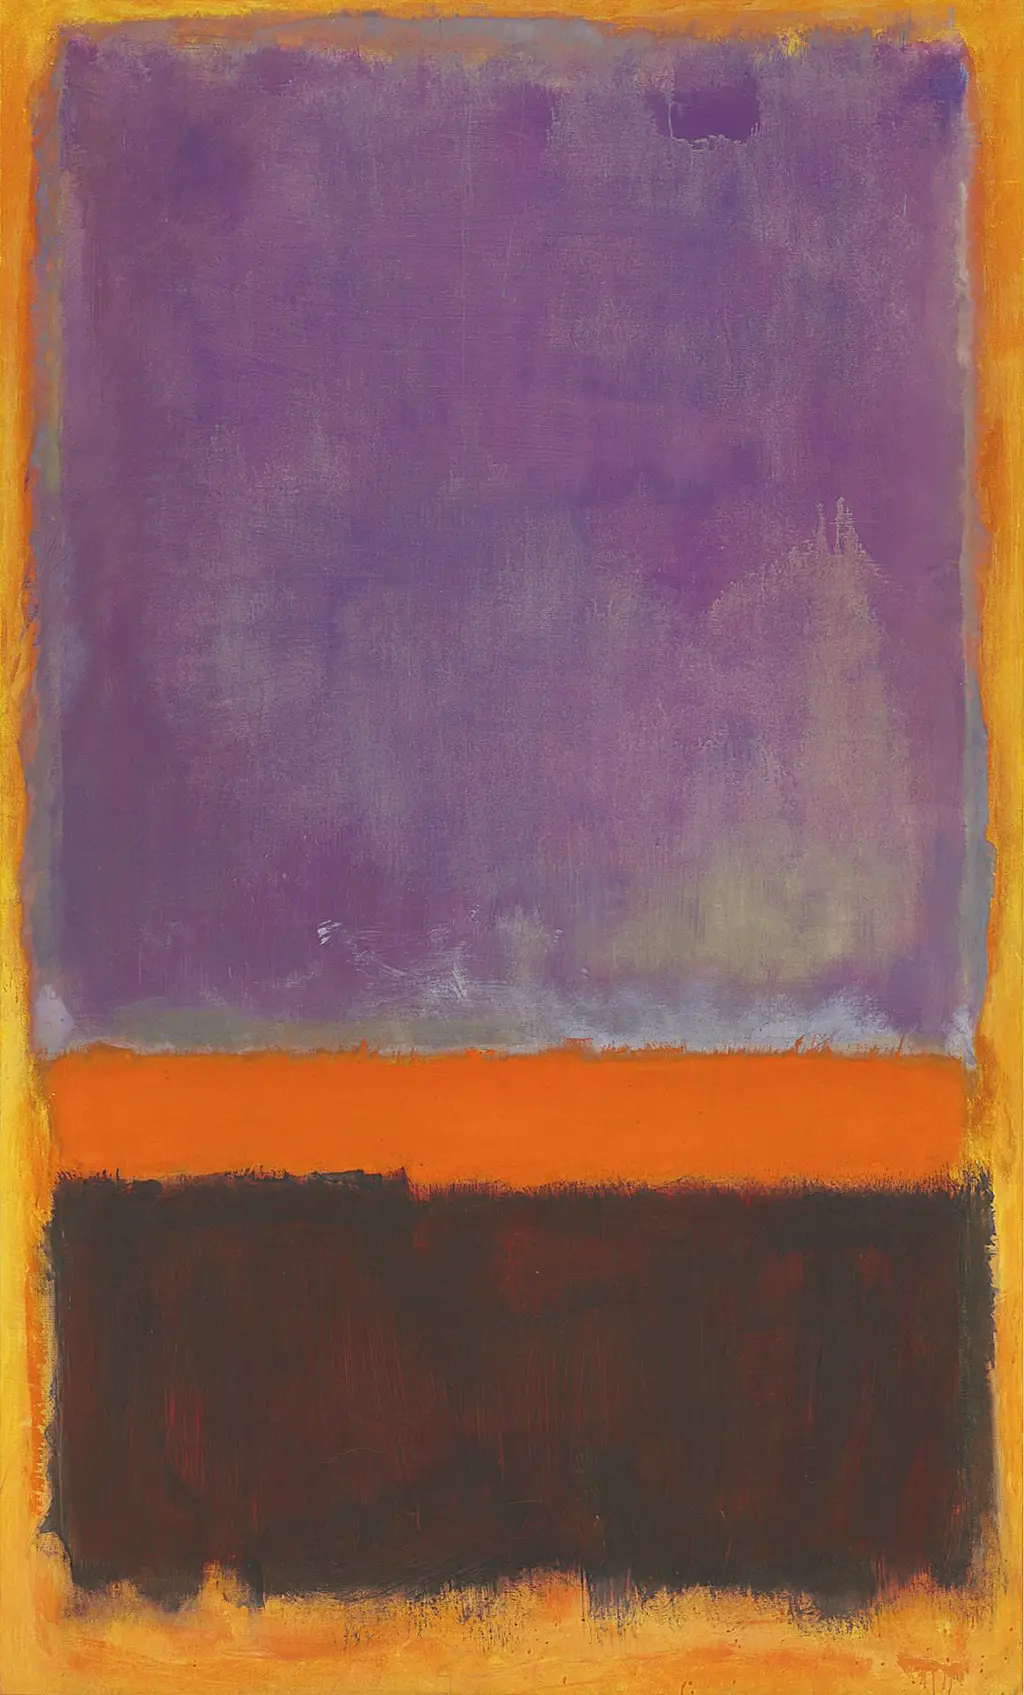 Untitled, 1953 in Detail by Mark Rothko